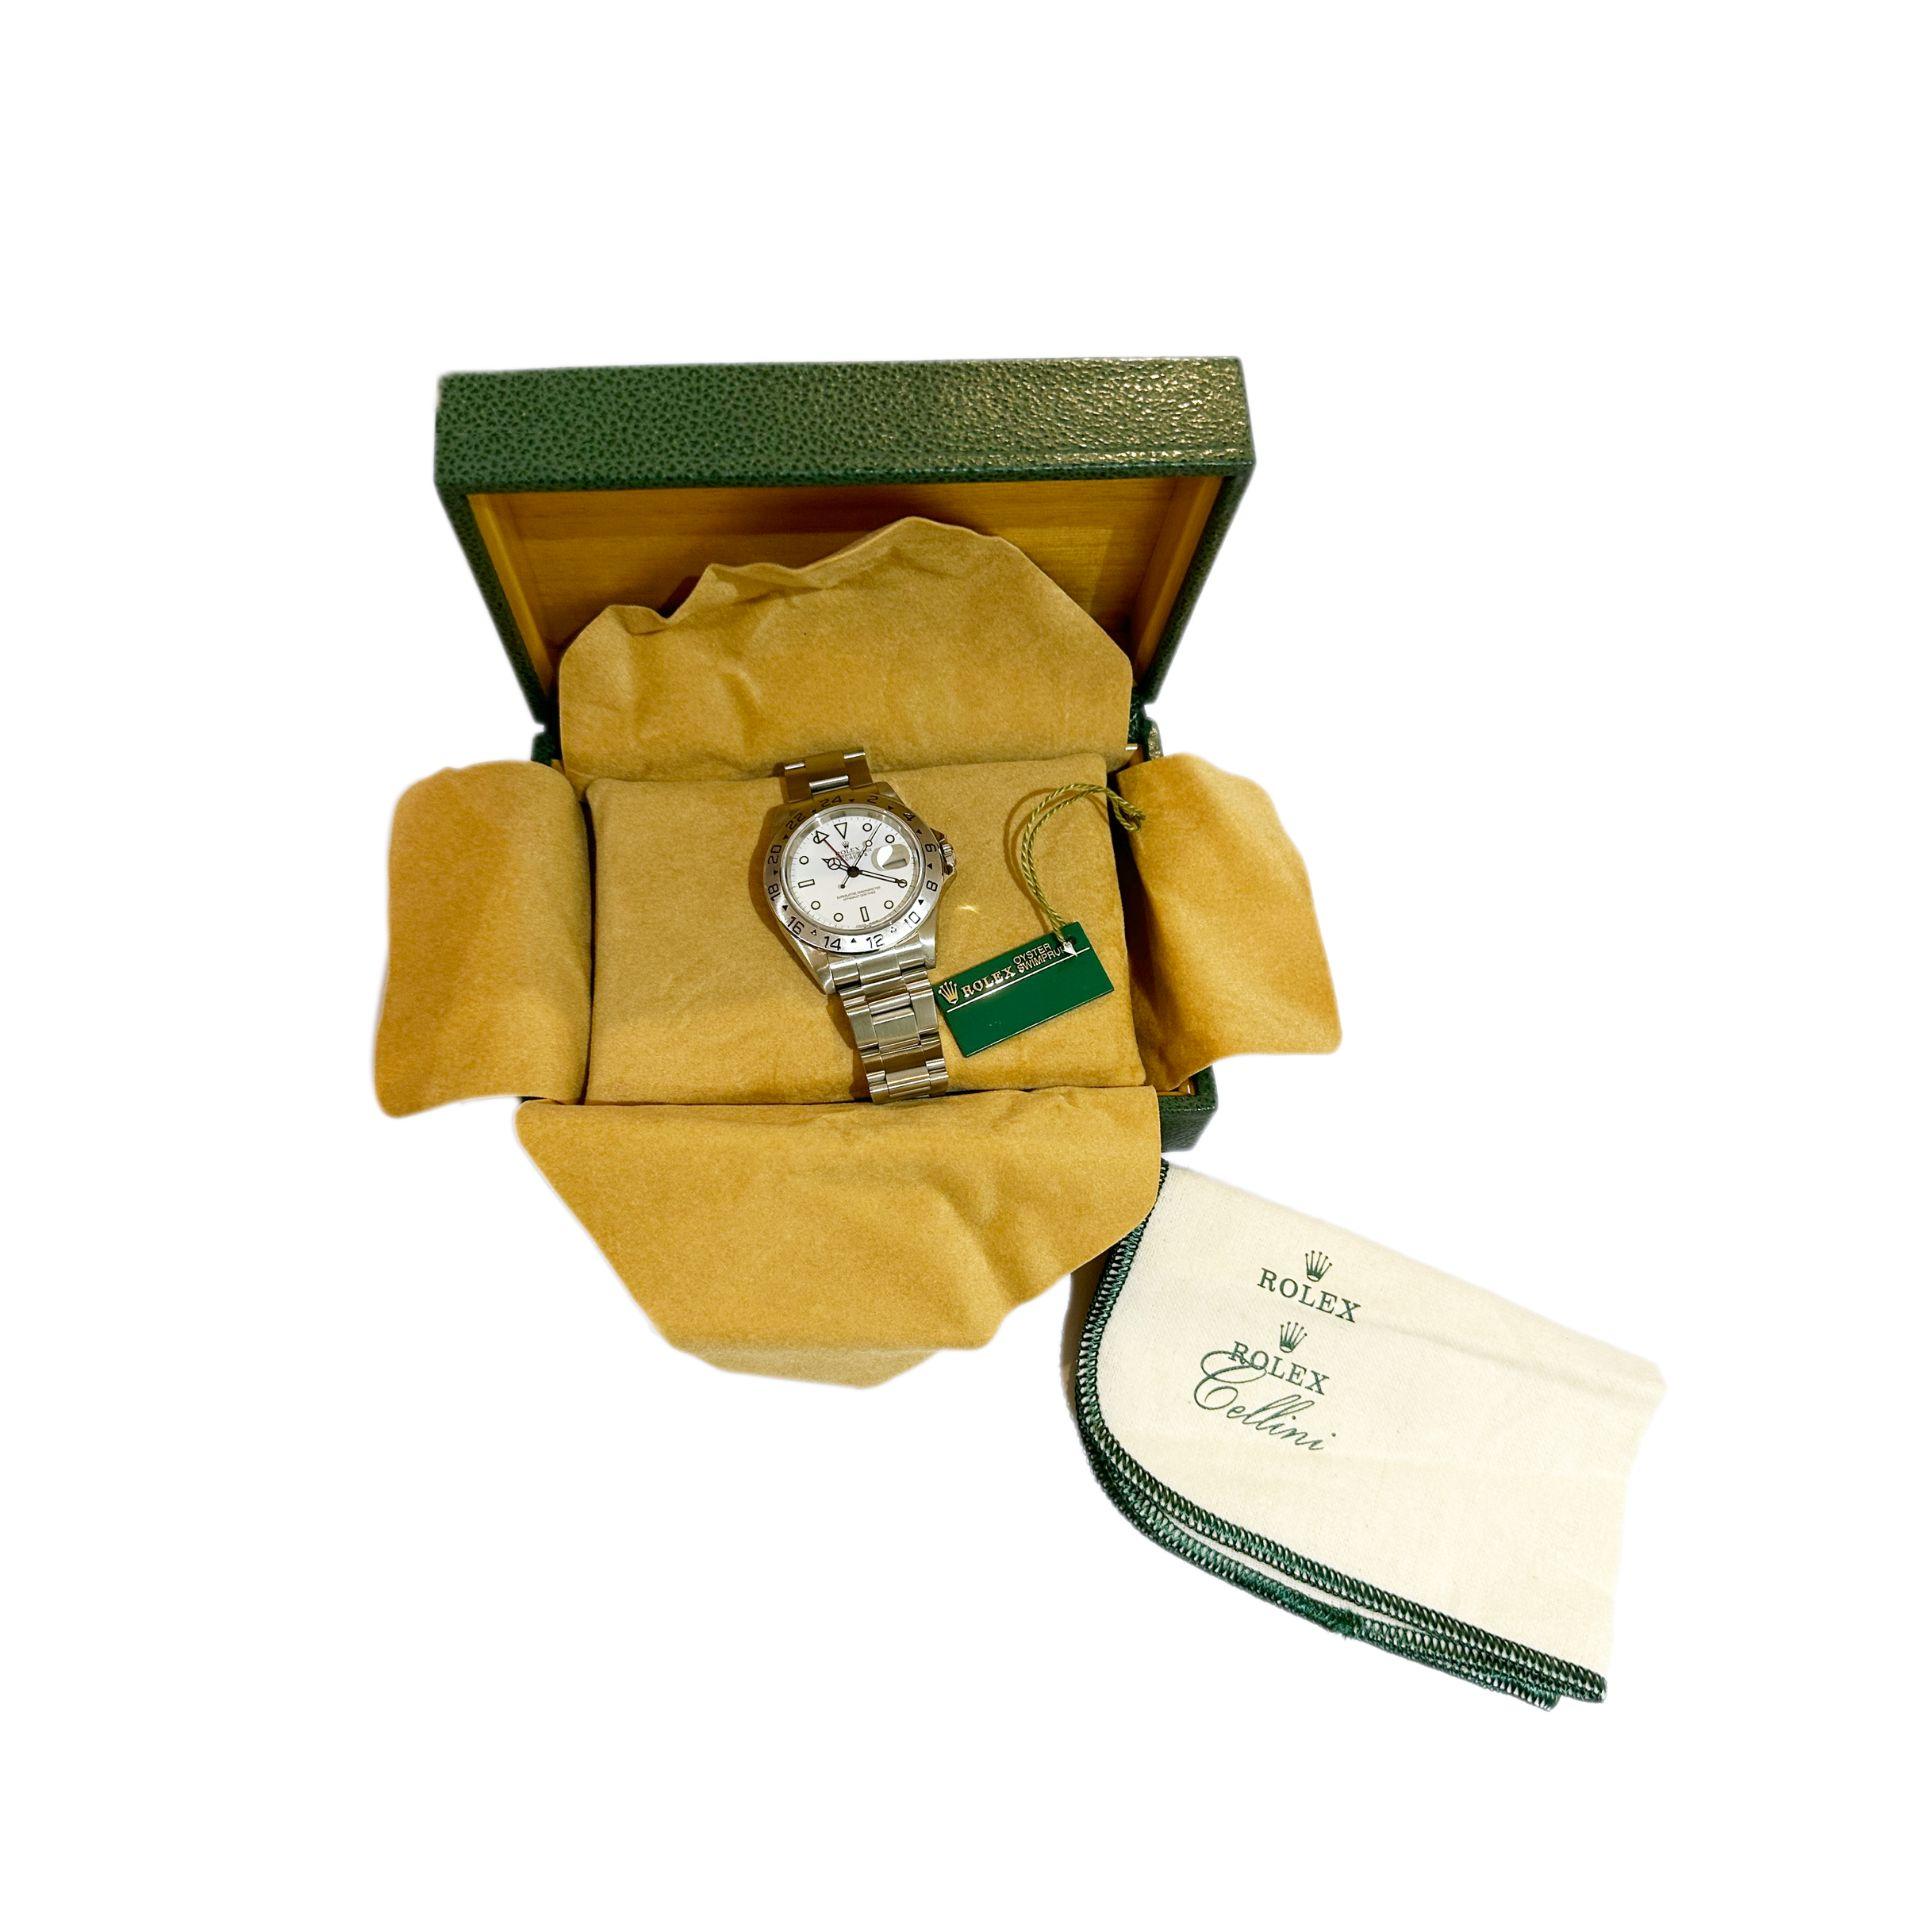 Rolex Oyster Explorer II 42mm White Dial Automatic Men's Watch - 16570 For Sale 12